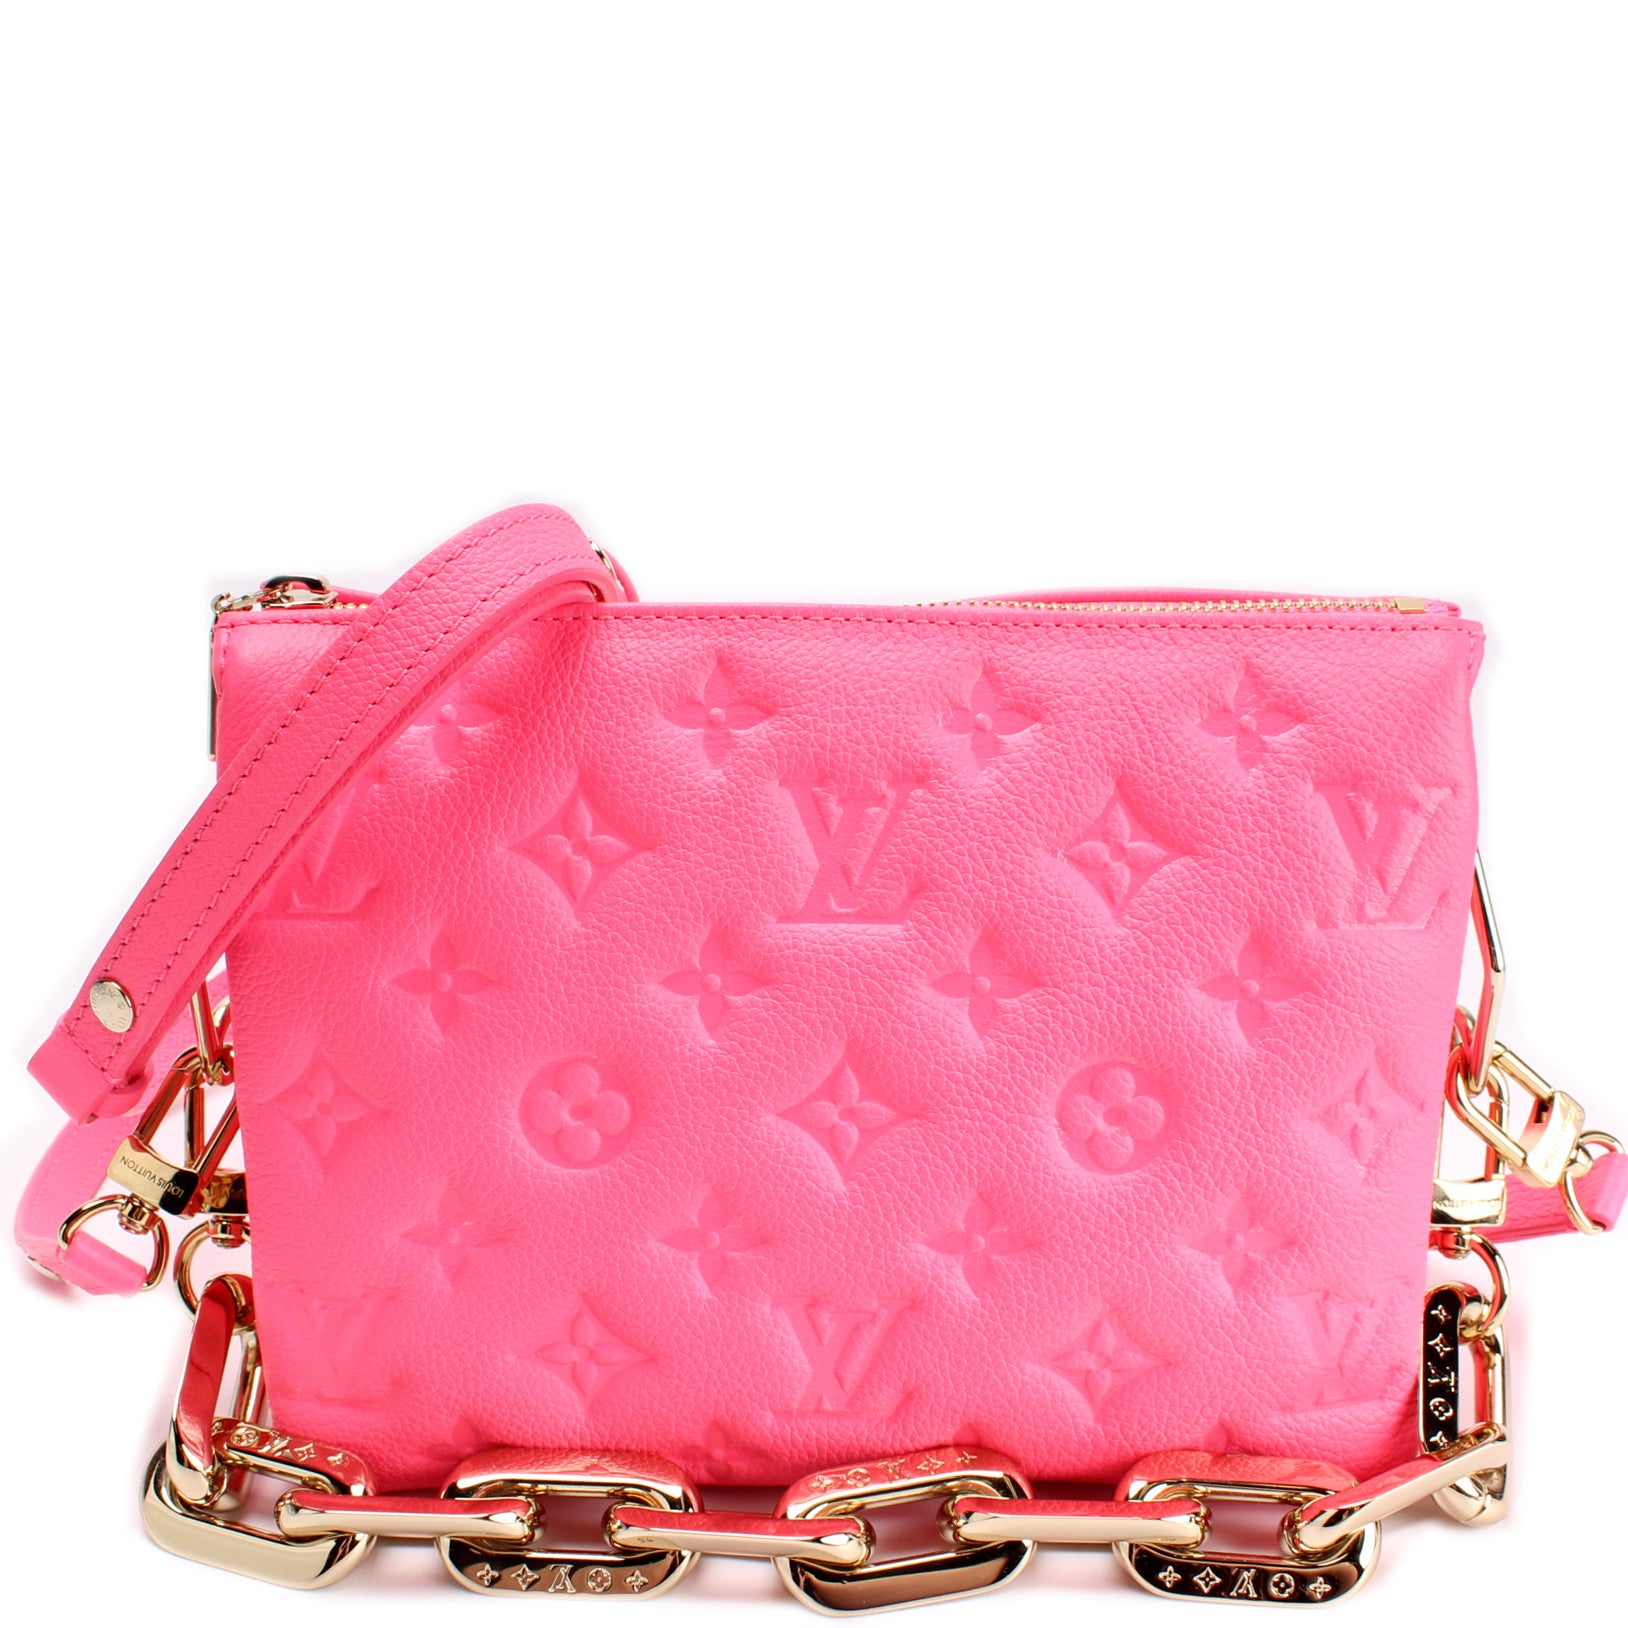 Louis Vuitton Coussin BB Red